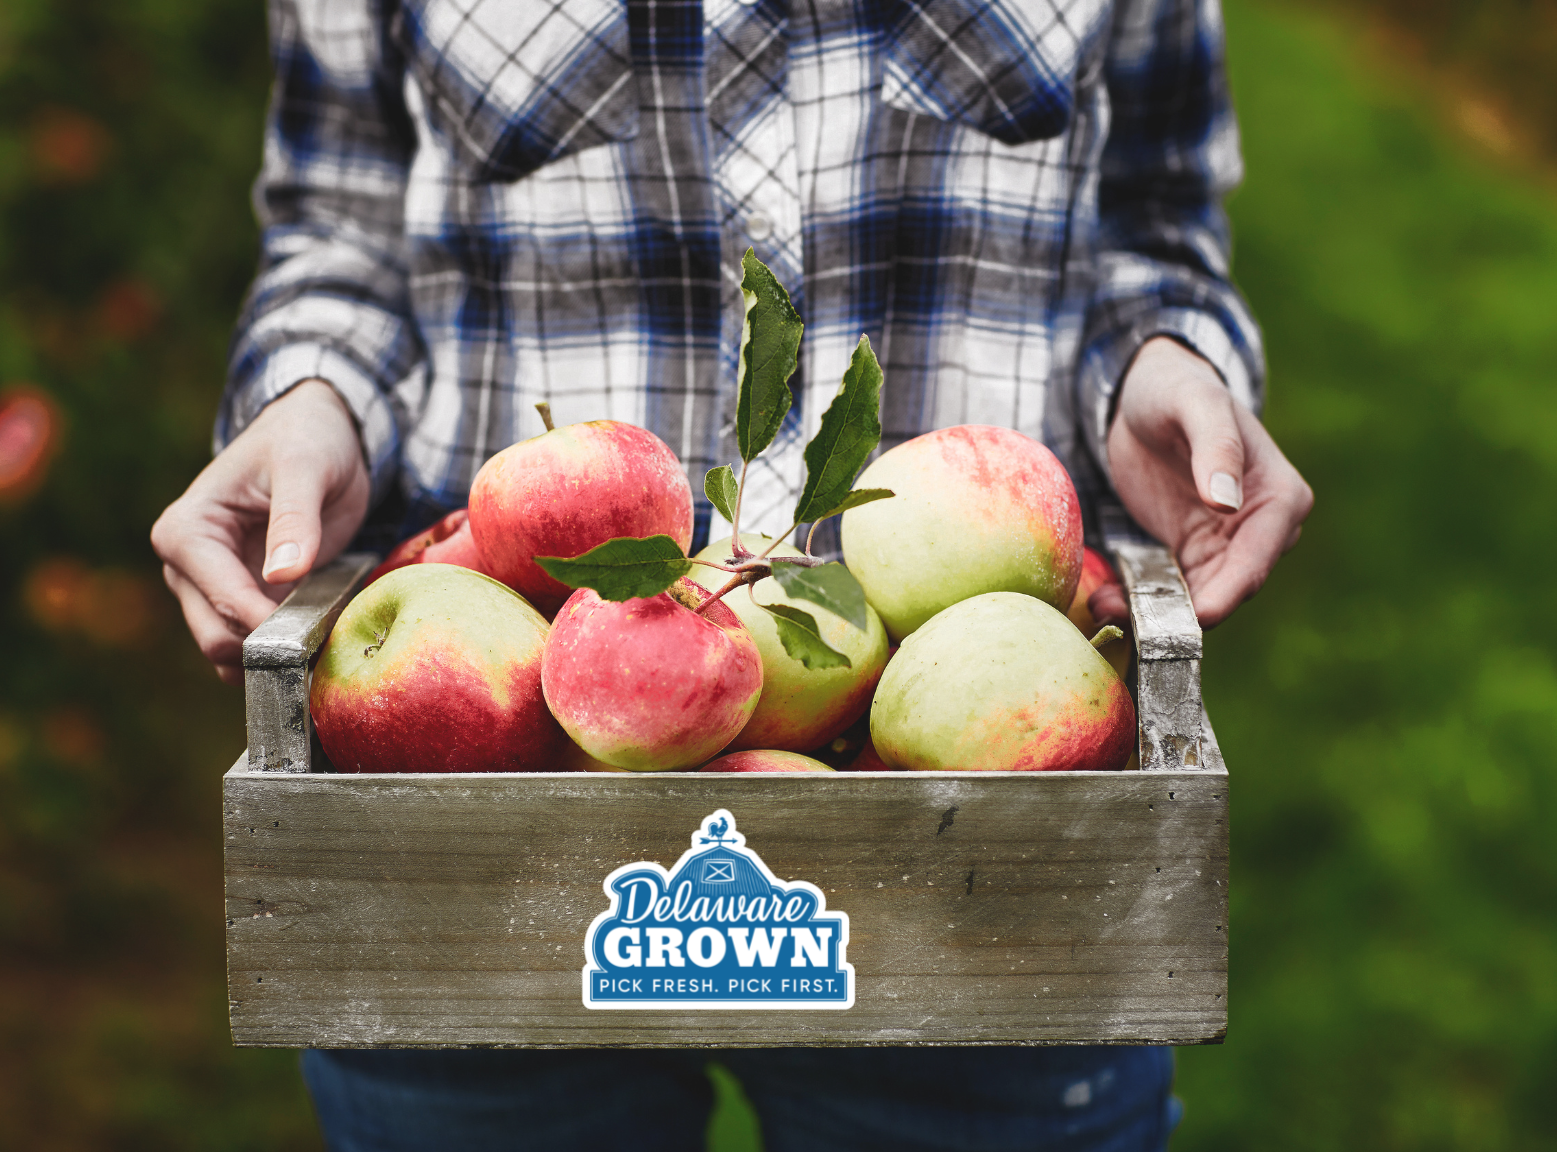 A woman in a flannel shirt and jeans holds a wooden flat of orchard-picked apples and a box with the Delaware Grohl logo